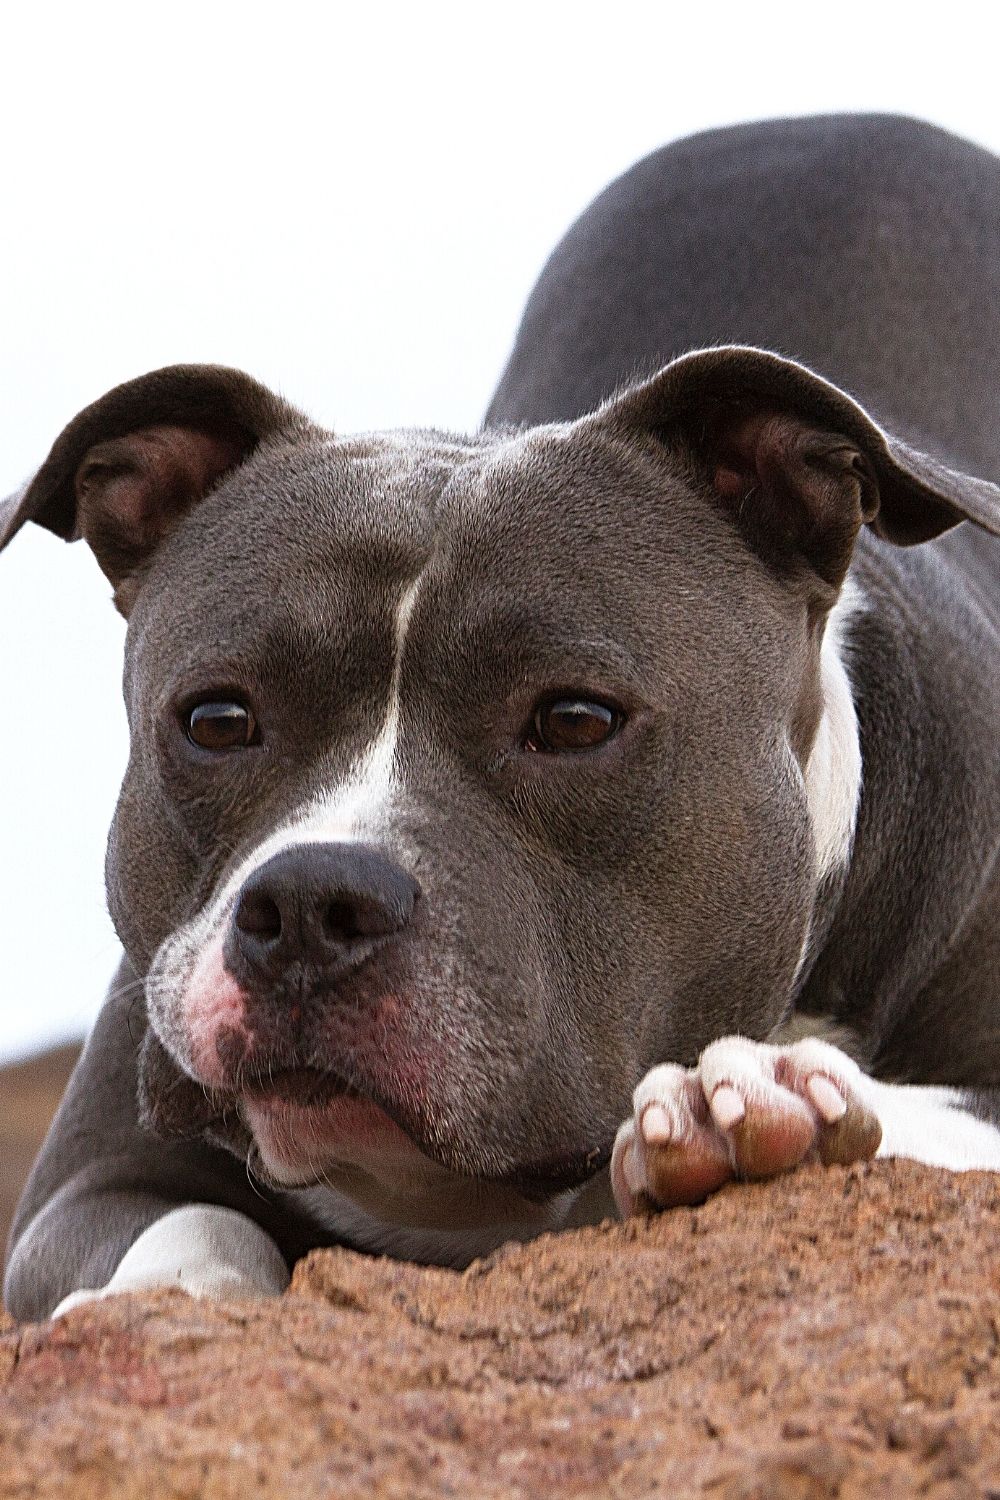 Tail docking is practiced in Pit Bulls because it was thought to increase its strength